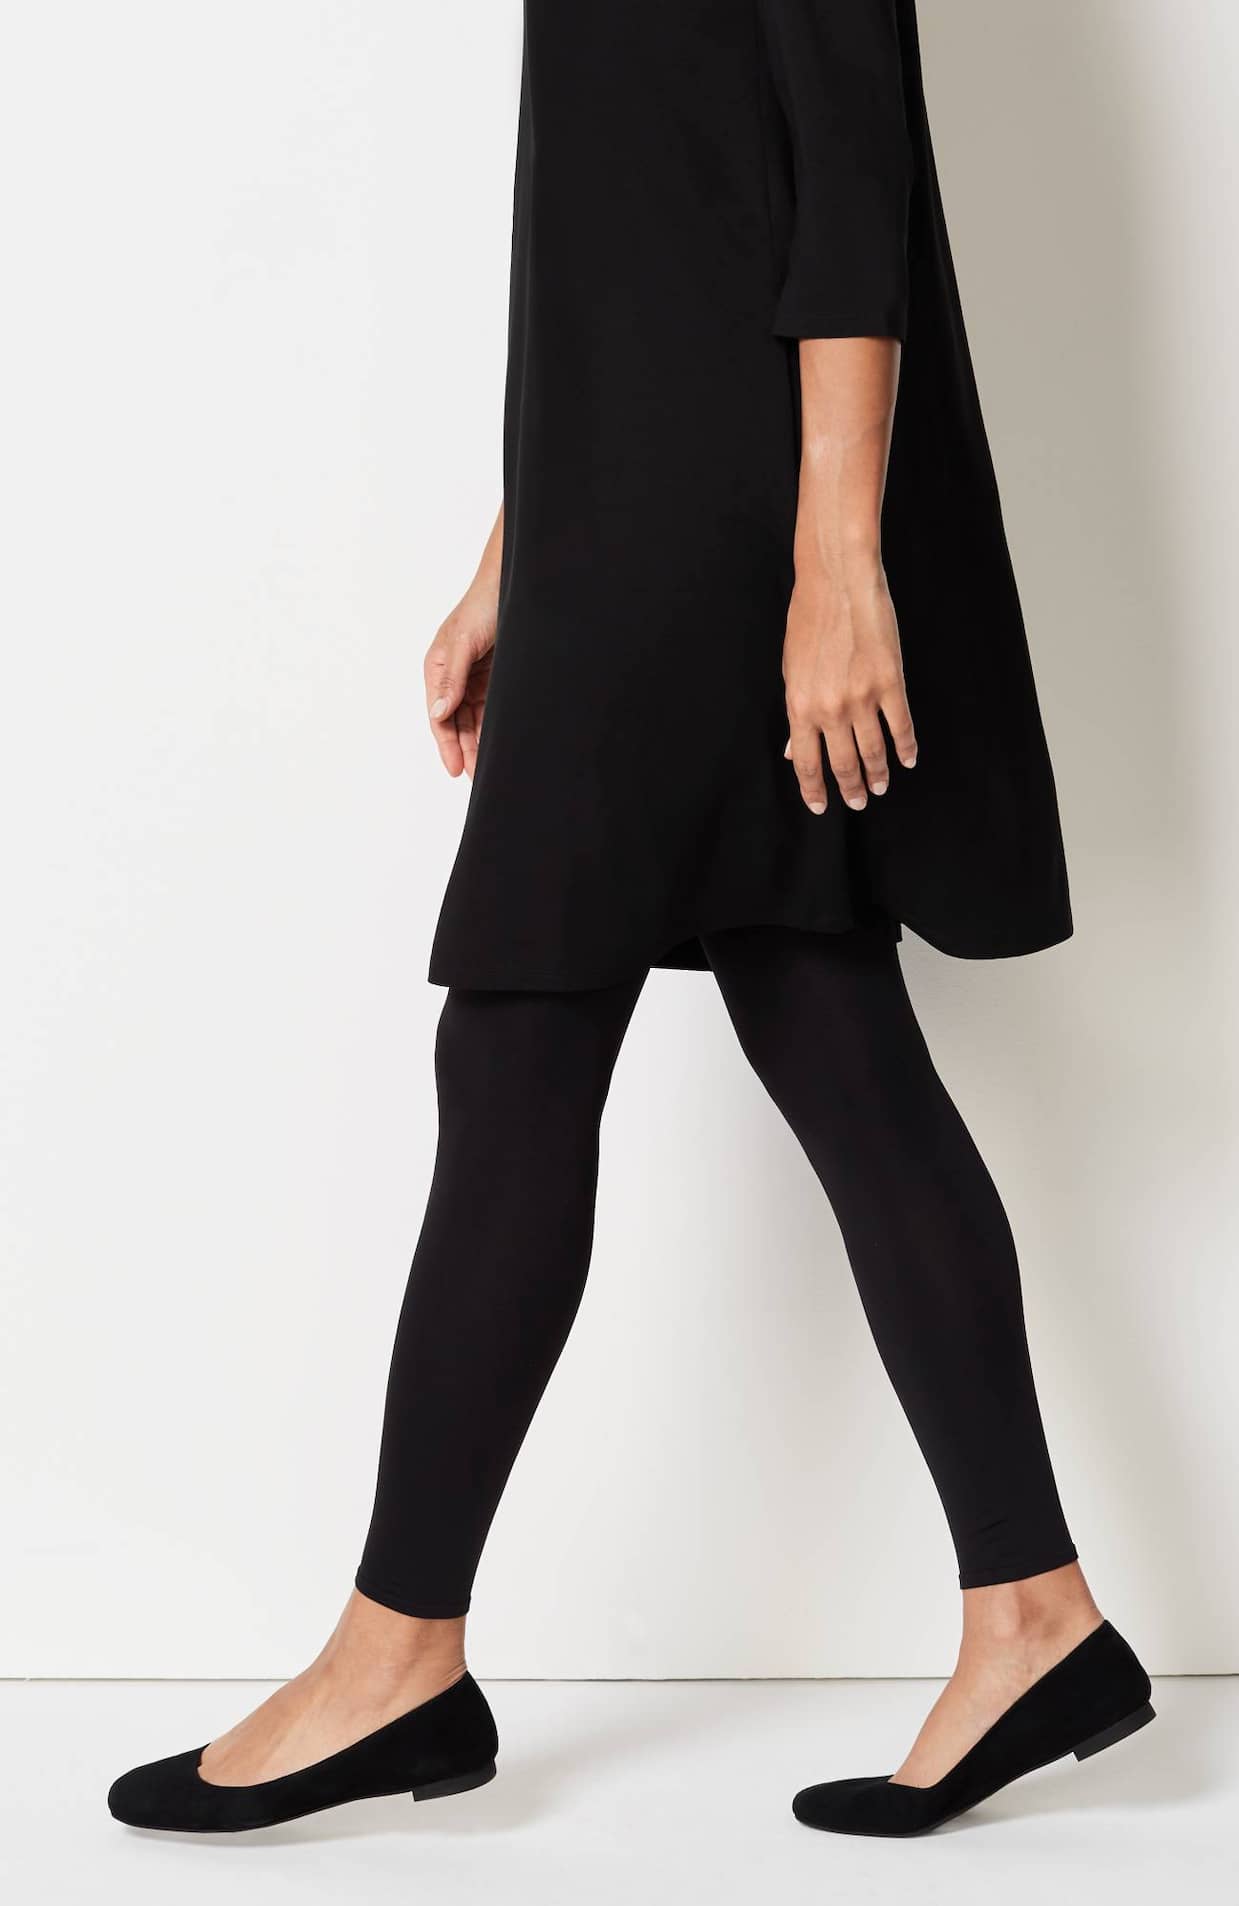 Take a look at this Black Seamless Lace Footless Tights by Music Legs on  #zulily today!